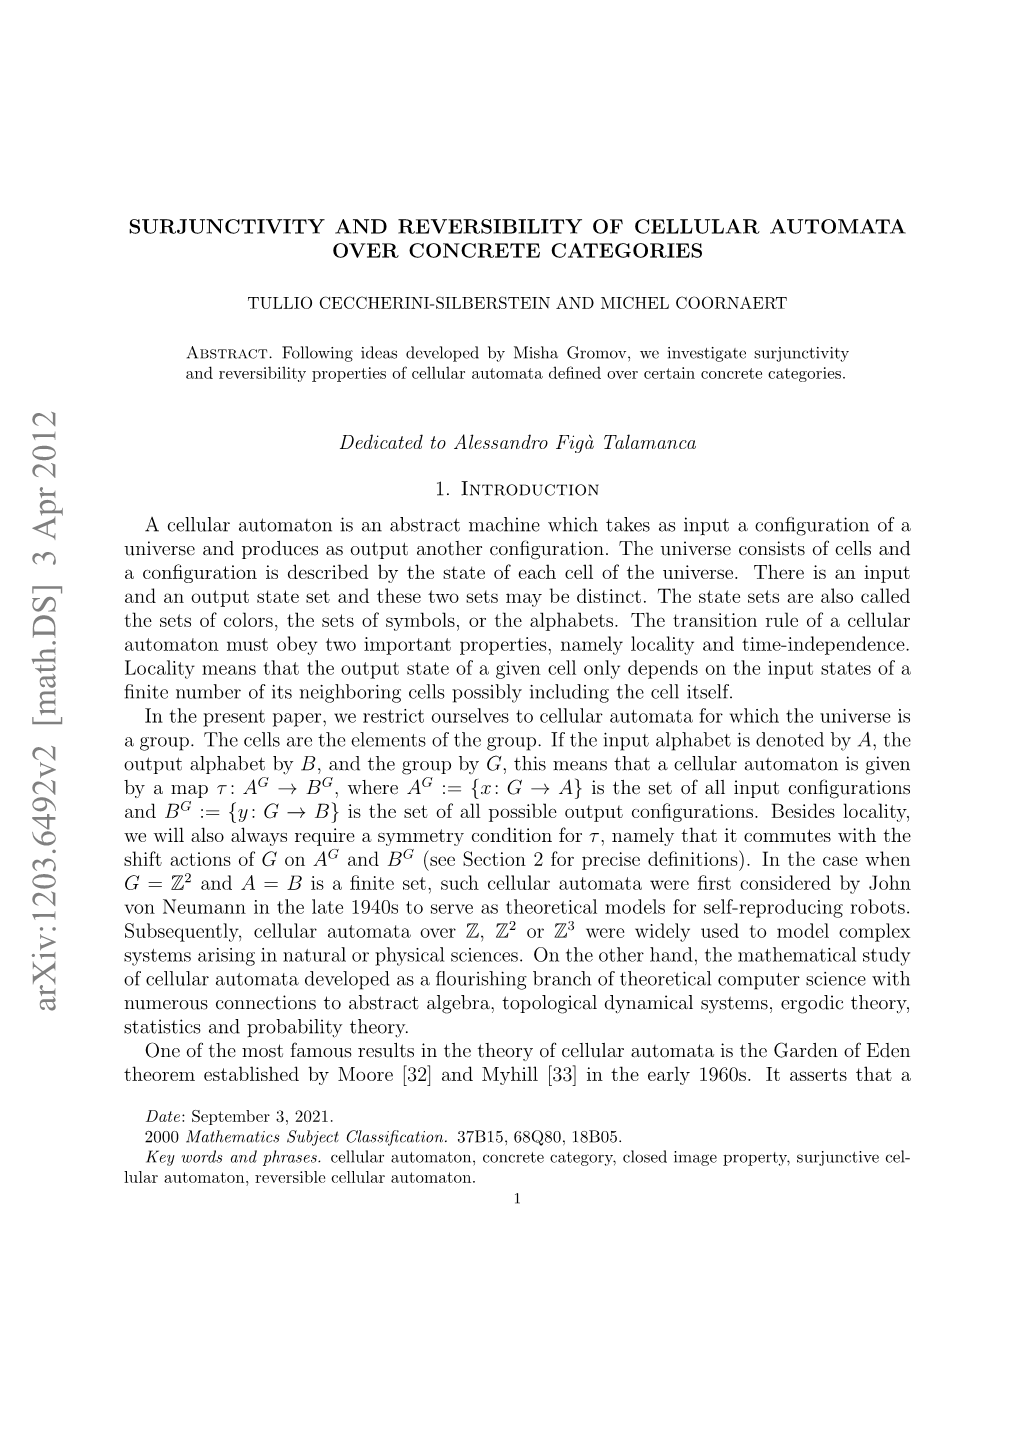 Surjunctivity and Reversibility of Cellular Automata Over Concrete